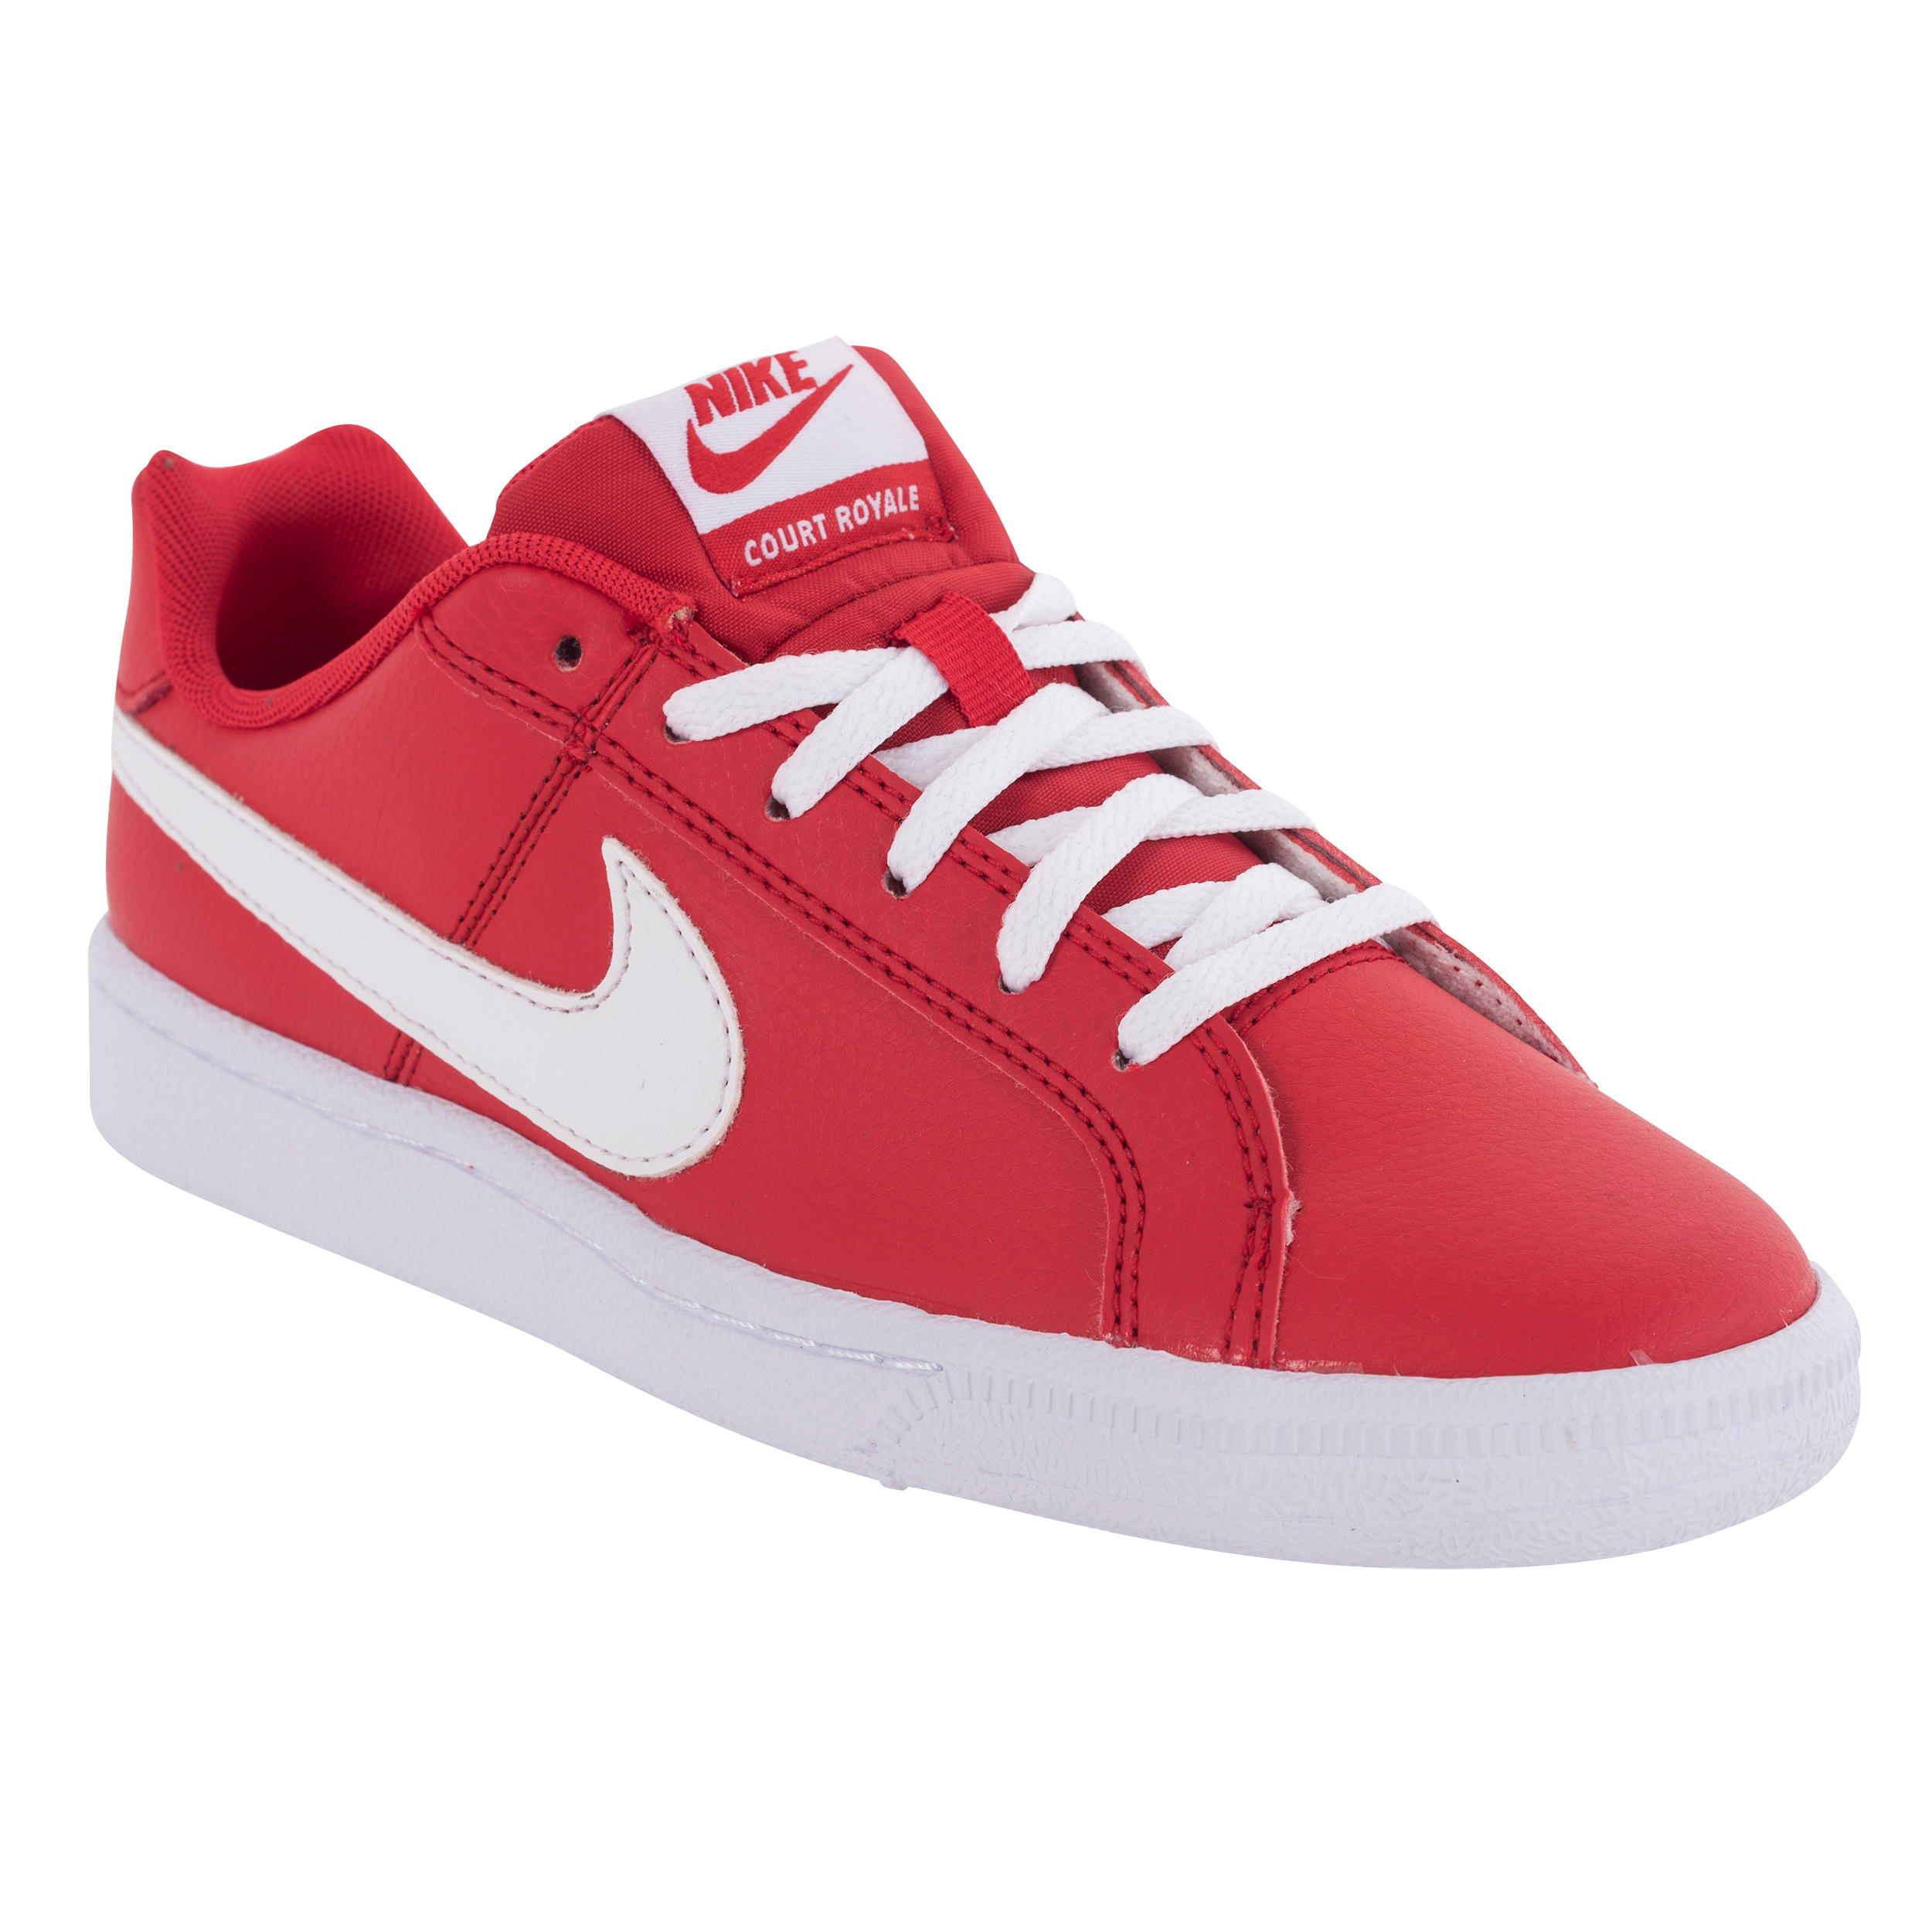 NIKE Court Royale Junior Tennis Shoes - Red